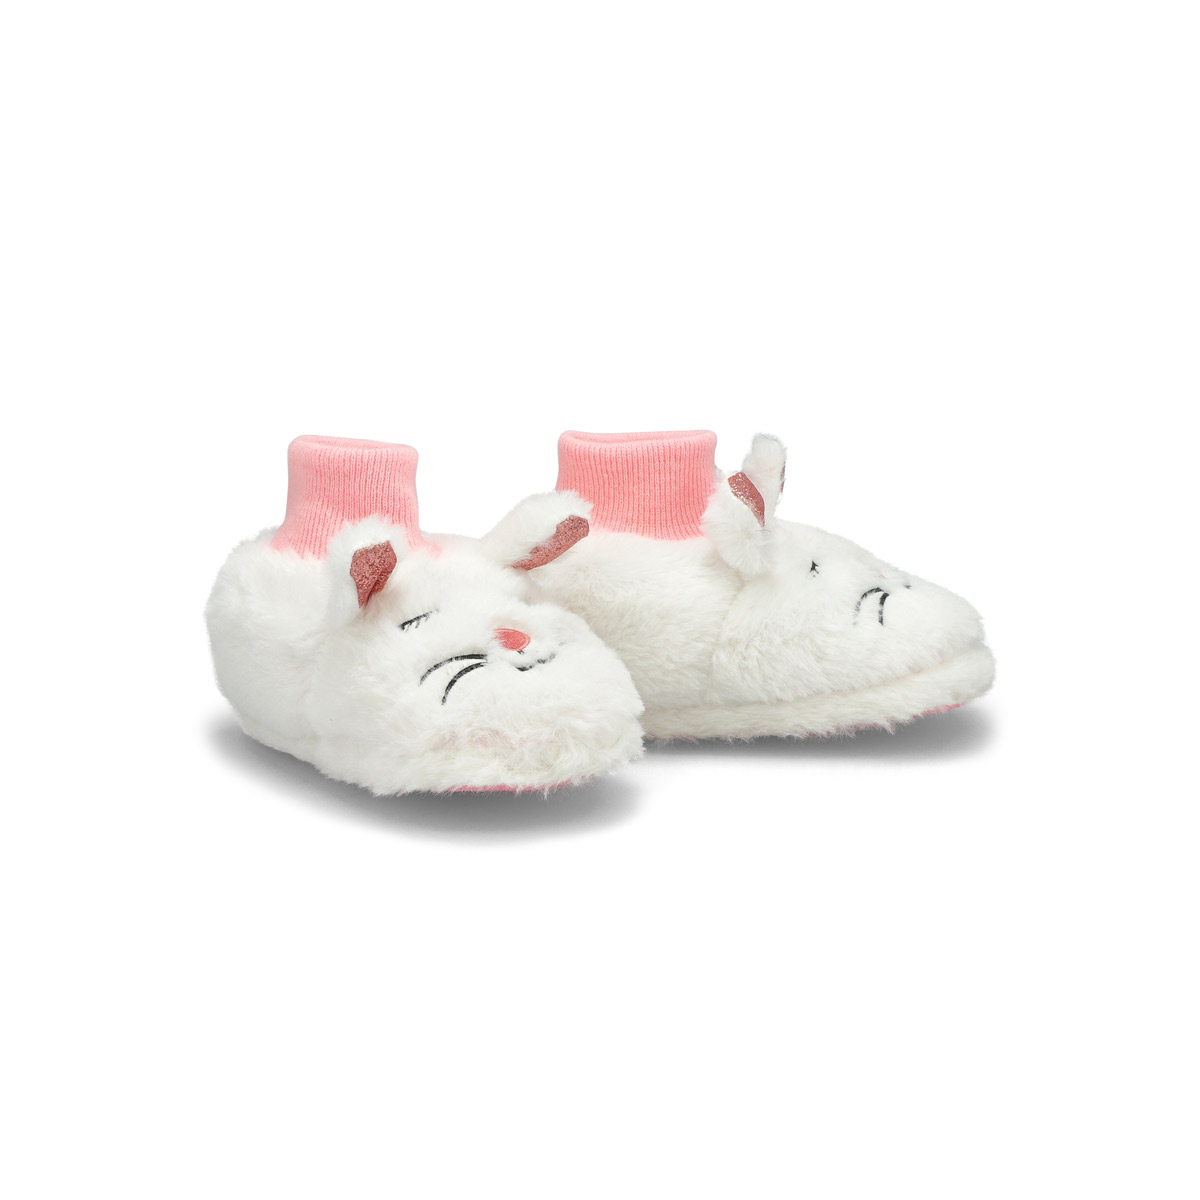 Infant's Kitty Slipper Bootie - White Pink